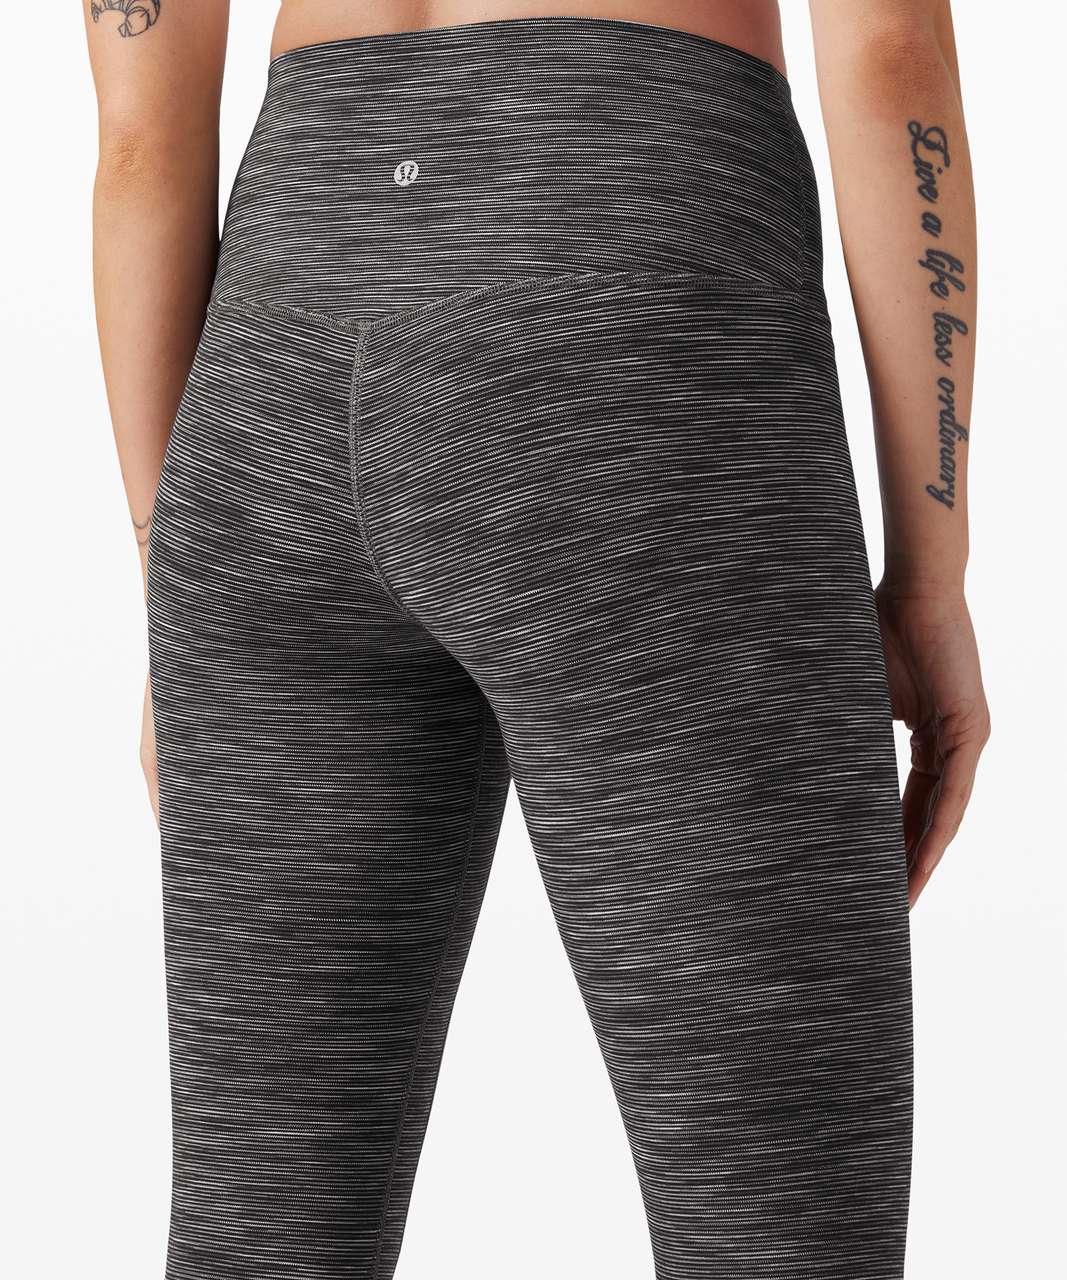 Lululemon Align™ Pant II 25" - Wee Are From Space Dark Carbon Ice Grey